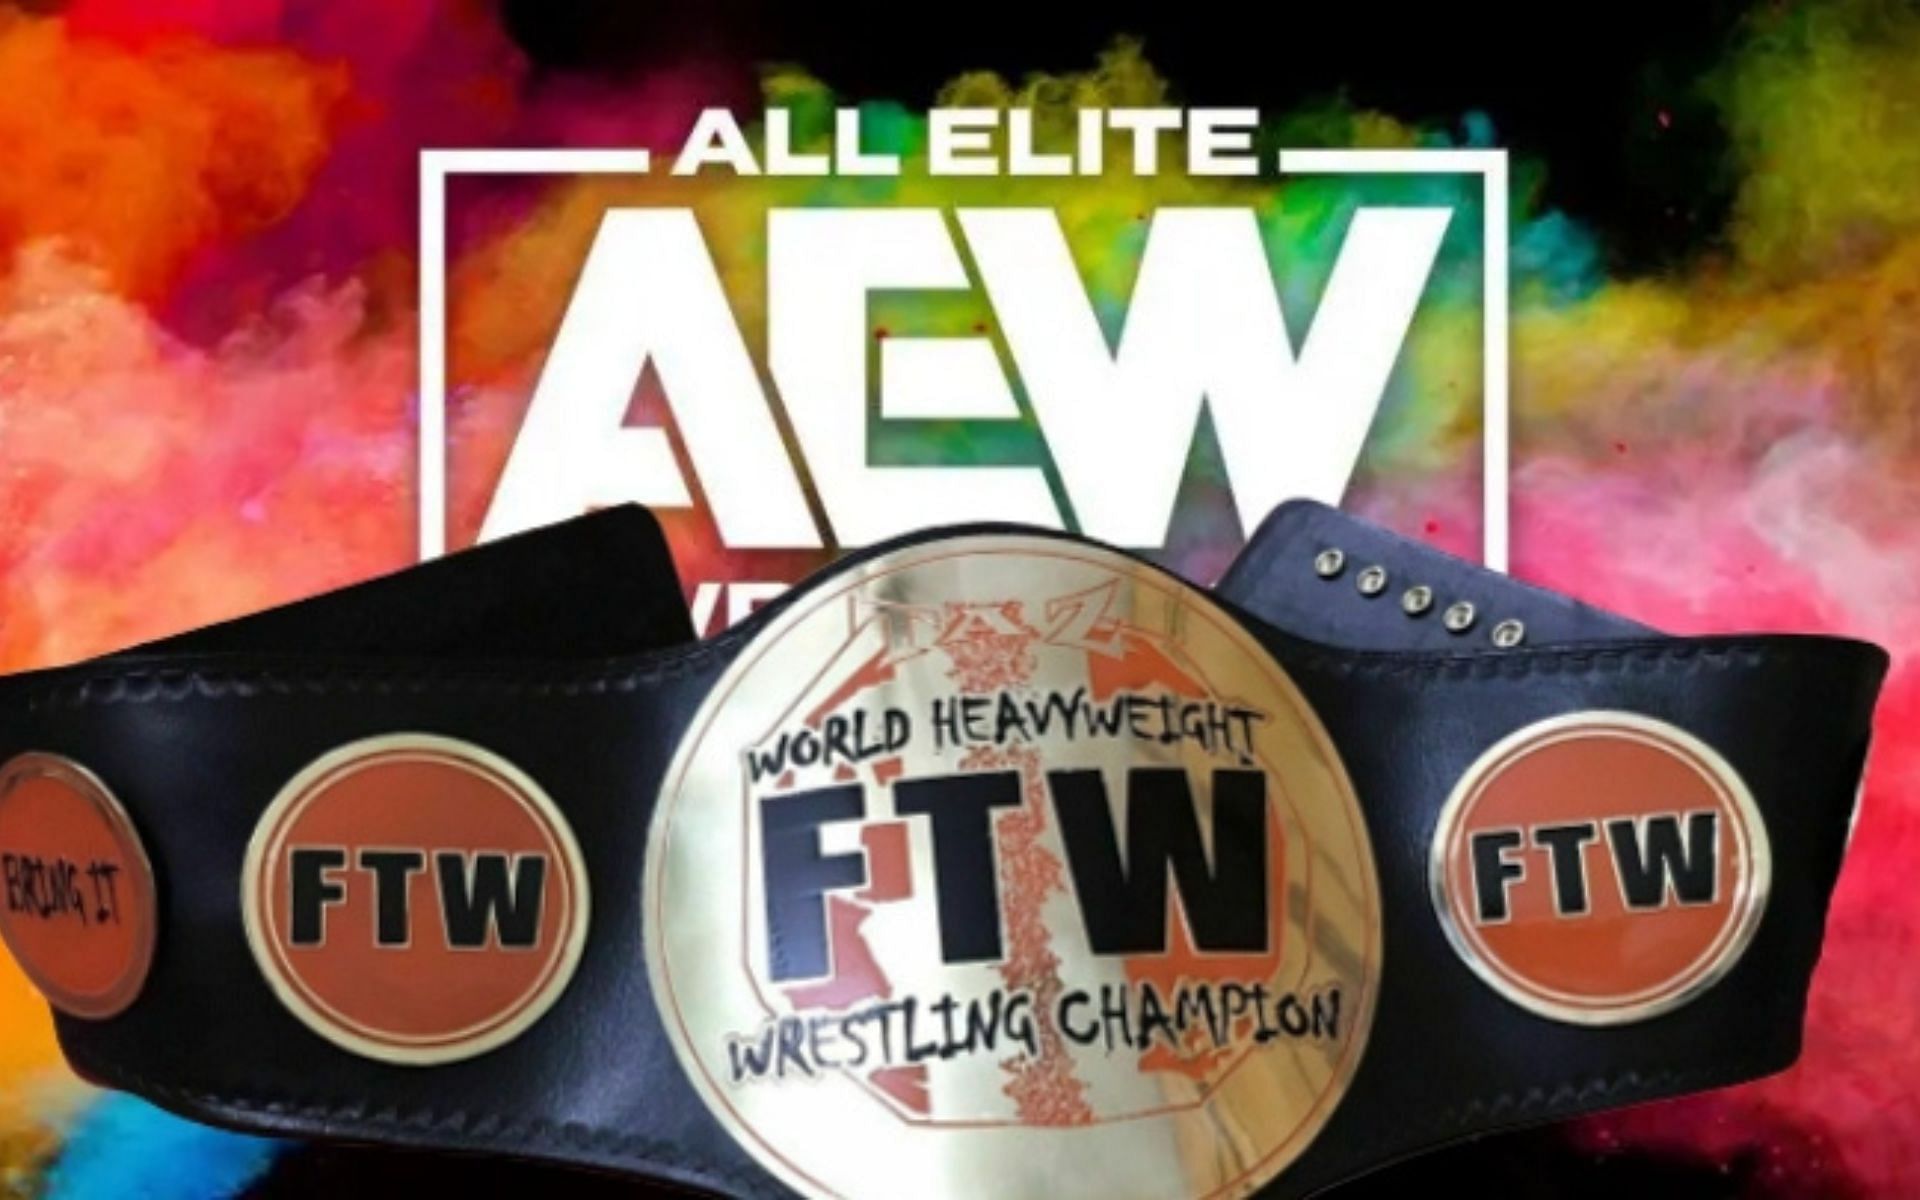 The FTW Championship boasts a rich history!